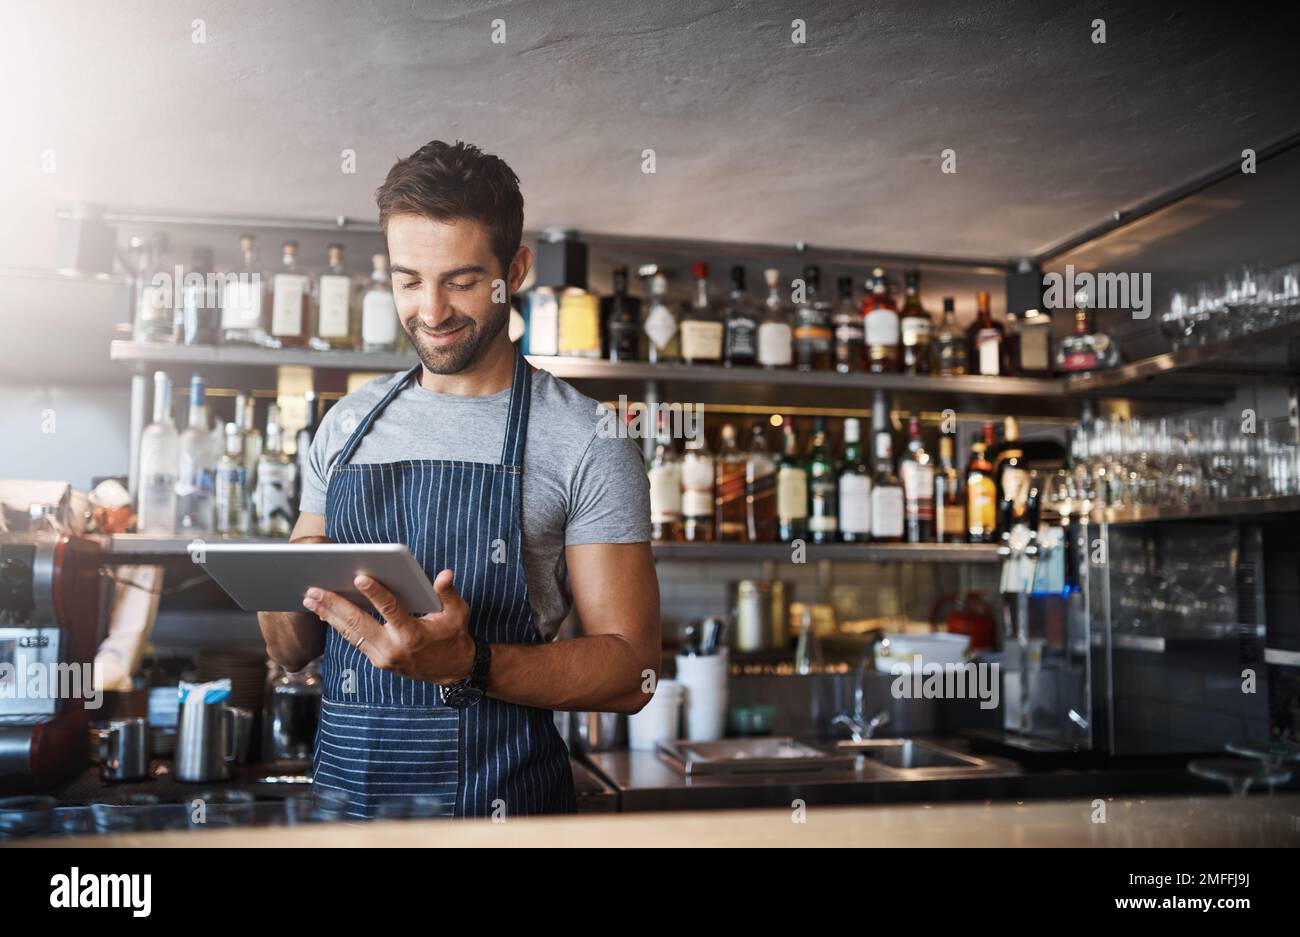 The digital bartender. a young man using a digital tablet while working behind a bar counter. Stock Photo